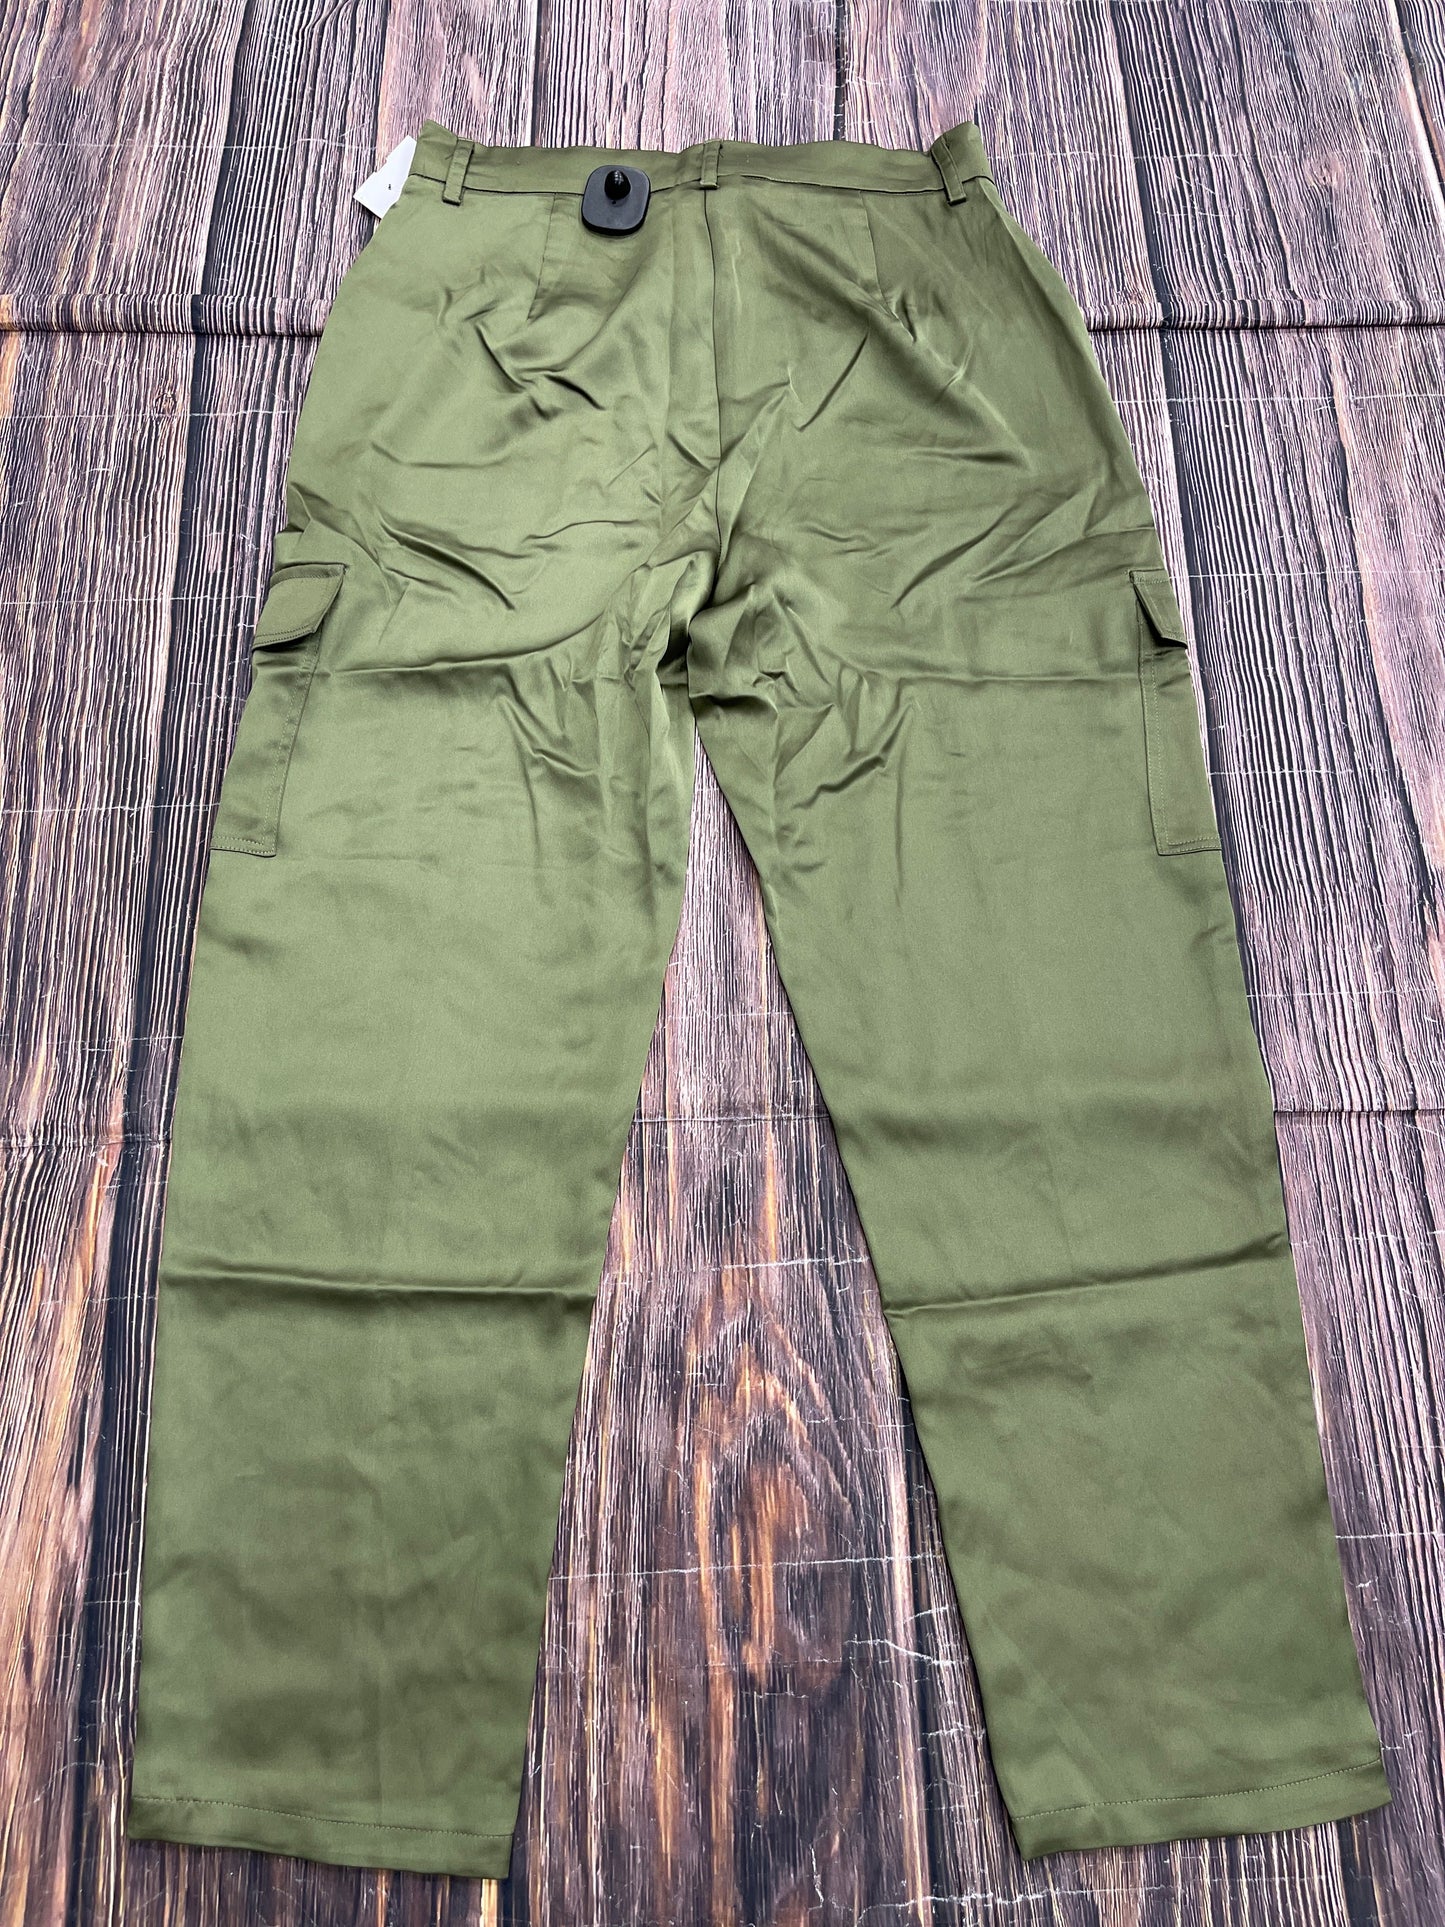 Pants Cargo & Utility By Bailey 44 Size 6